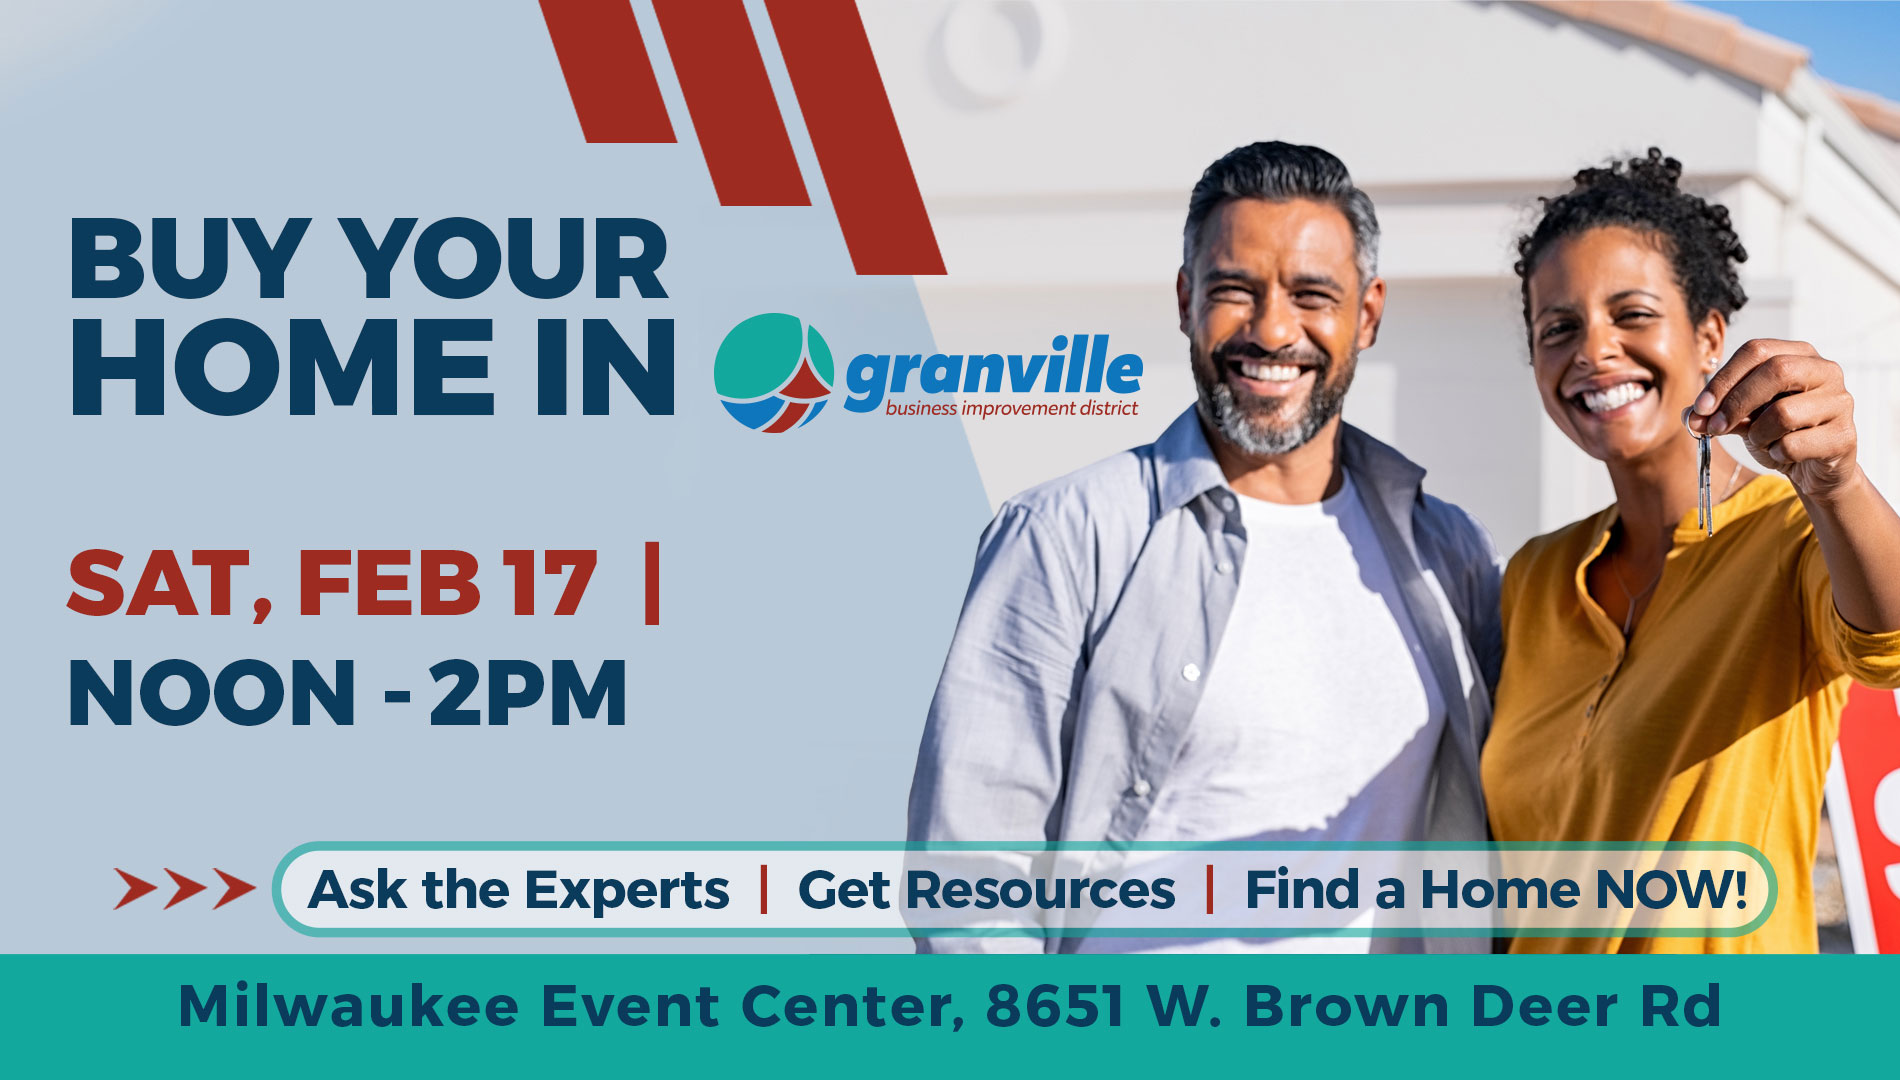 Buy your home in Granville